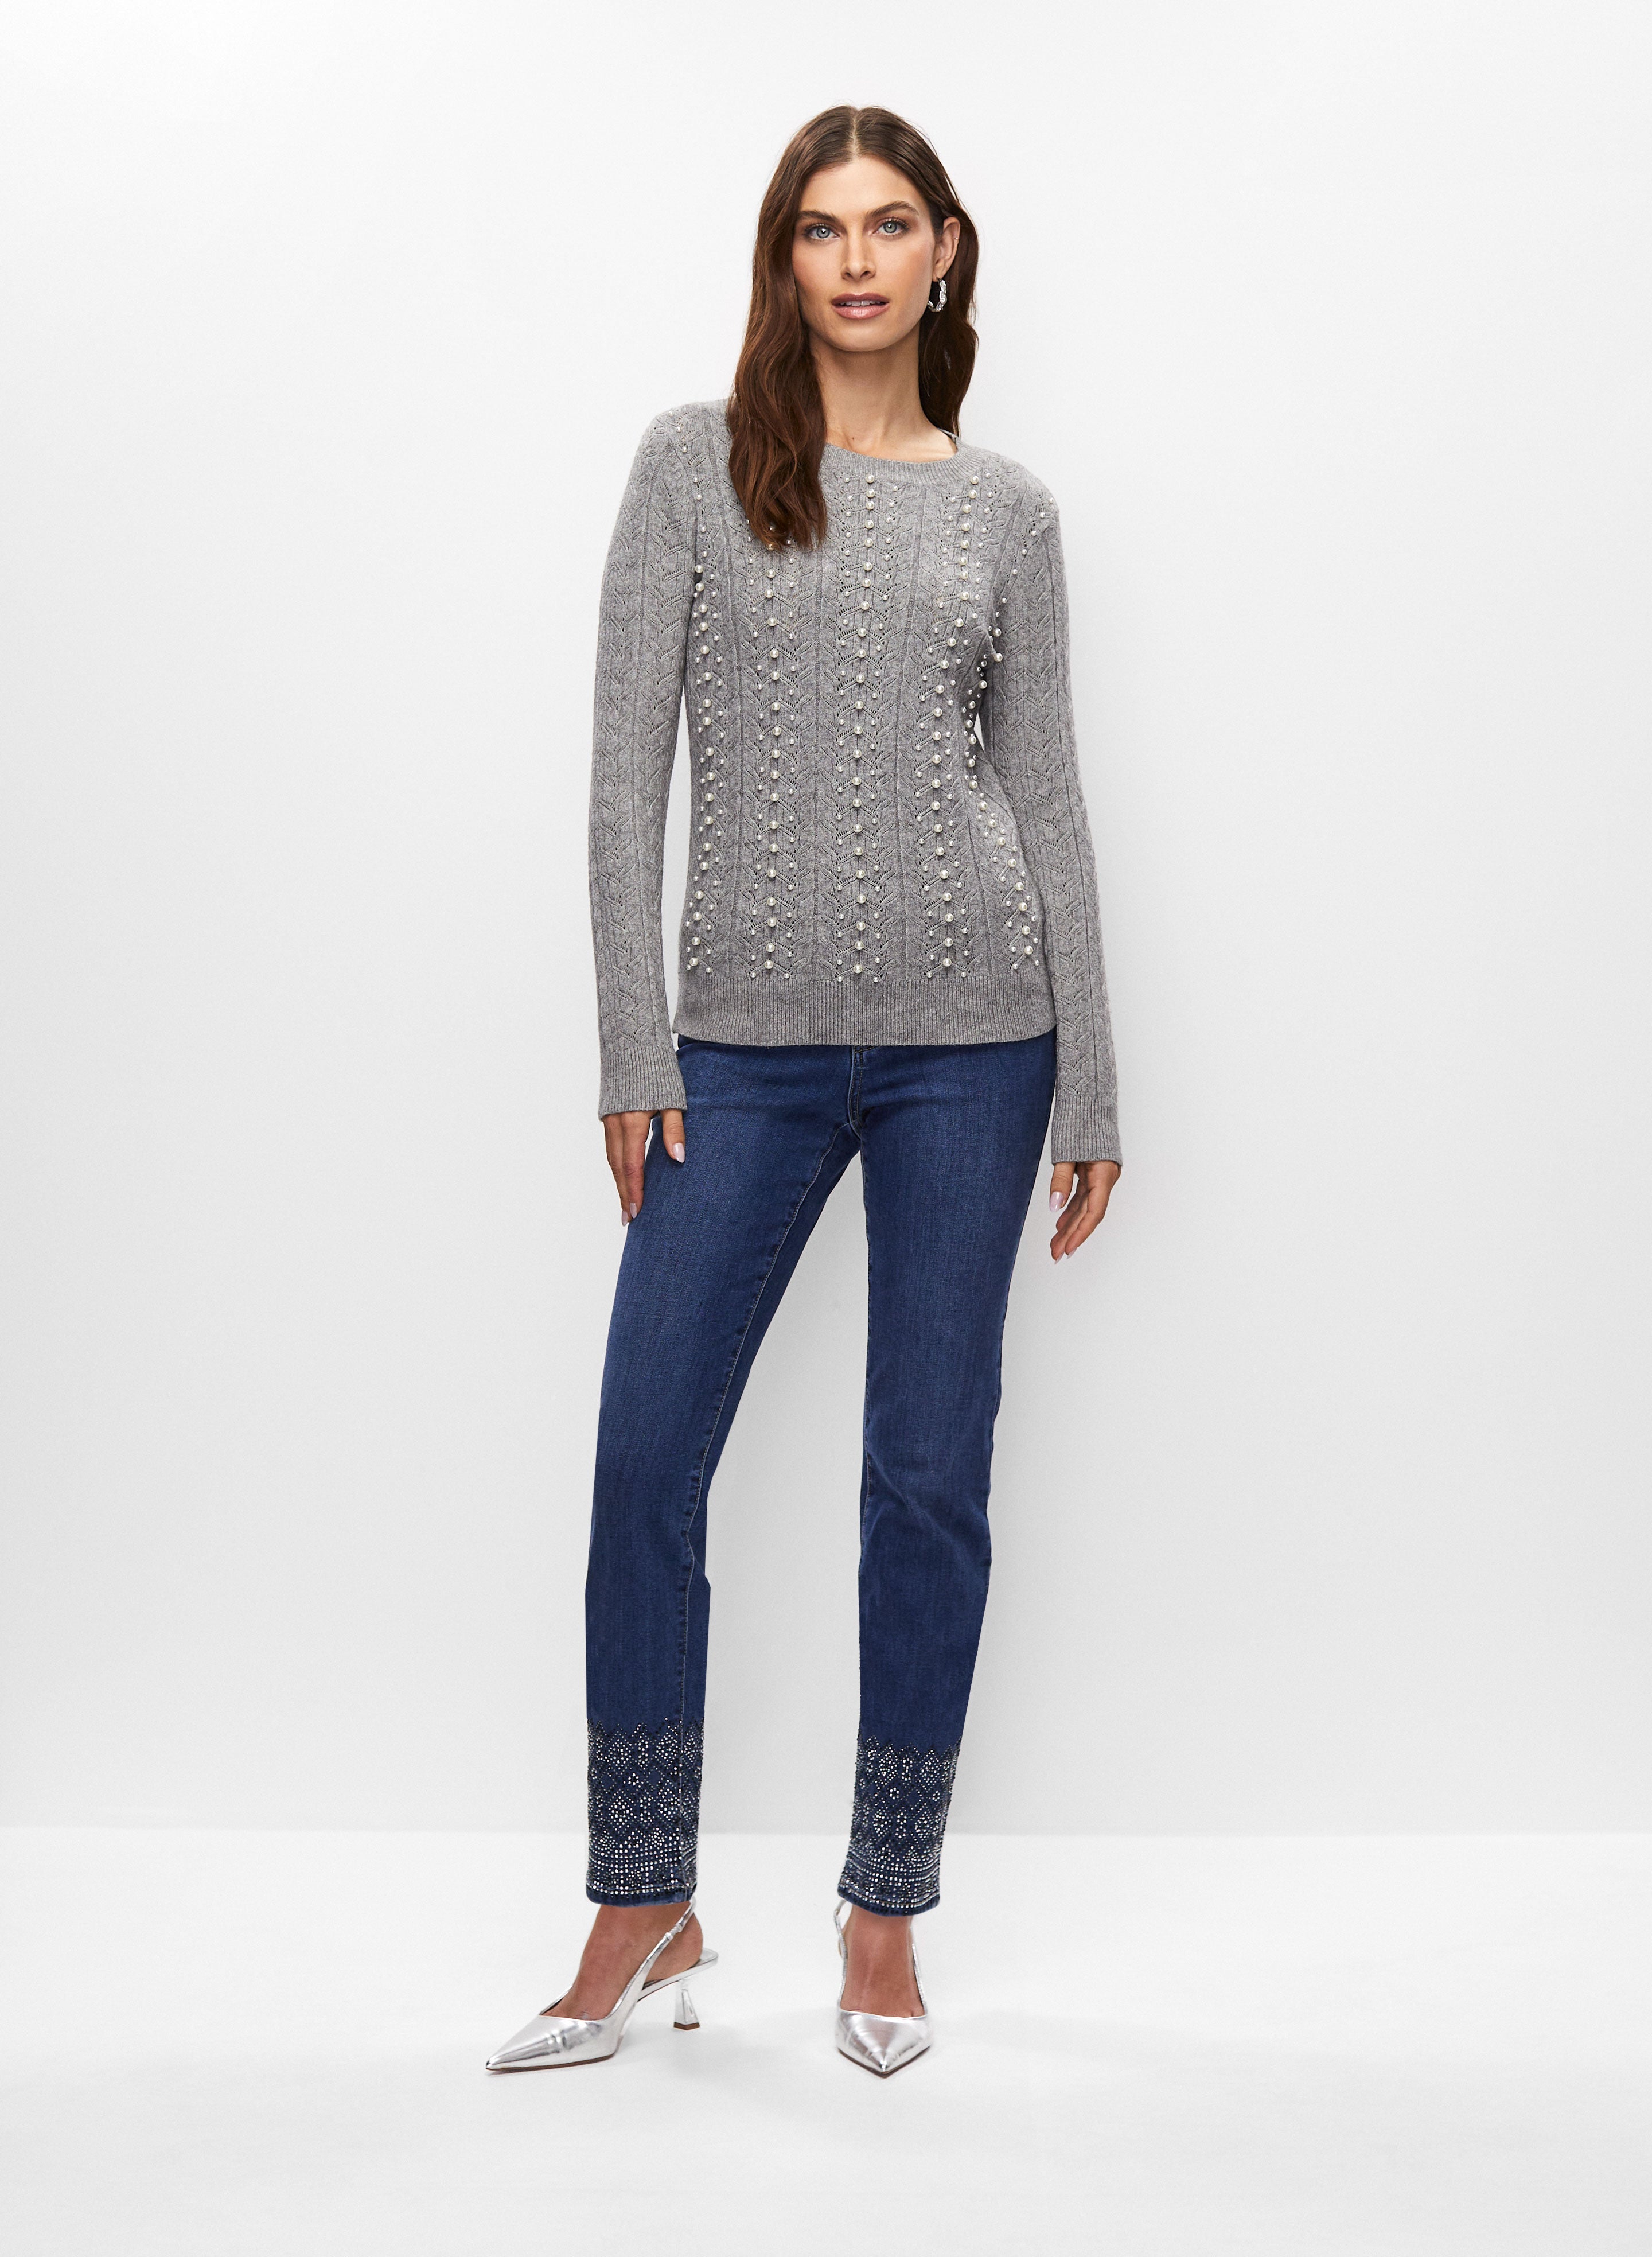 Pearl Detail Sweater & Embellished Jeans